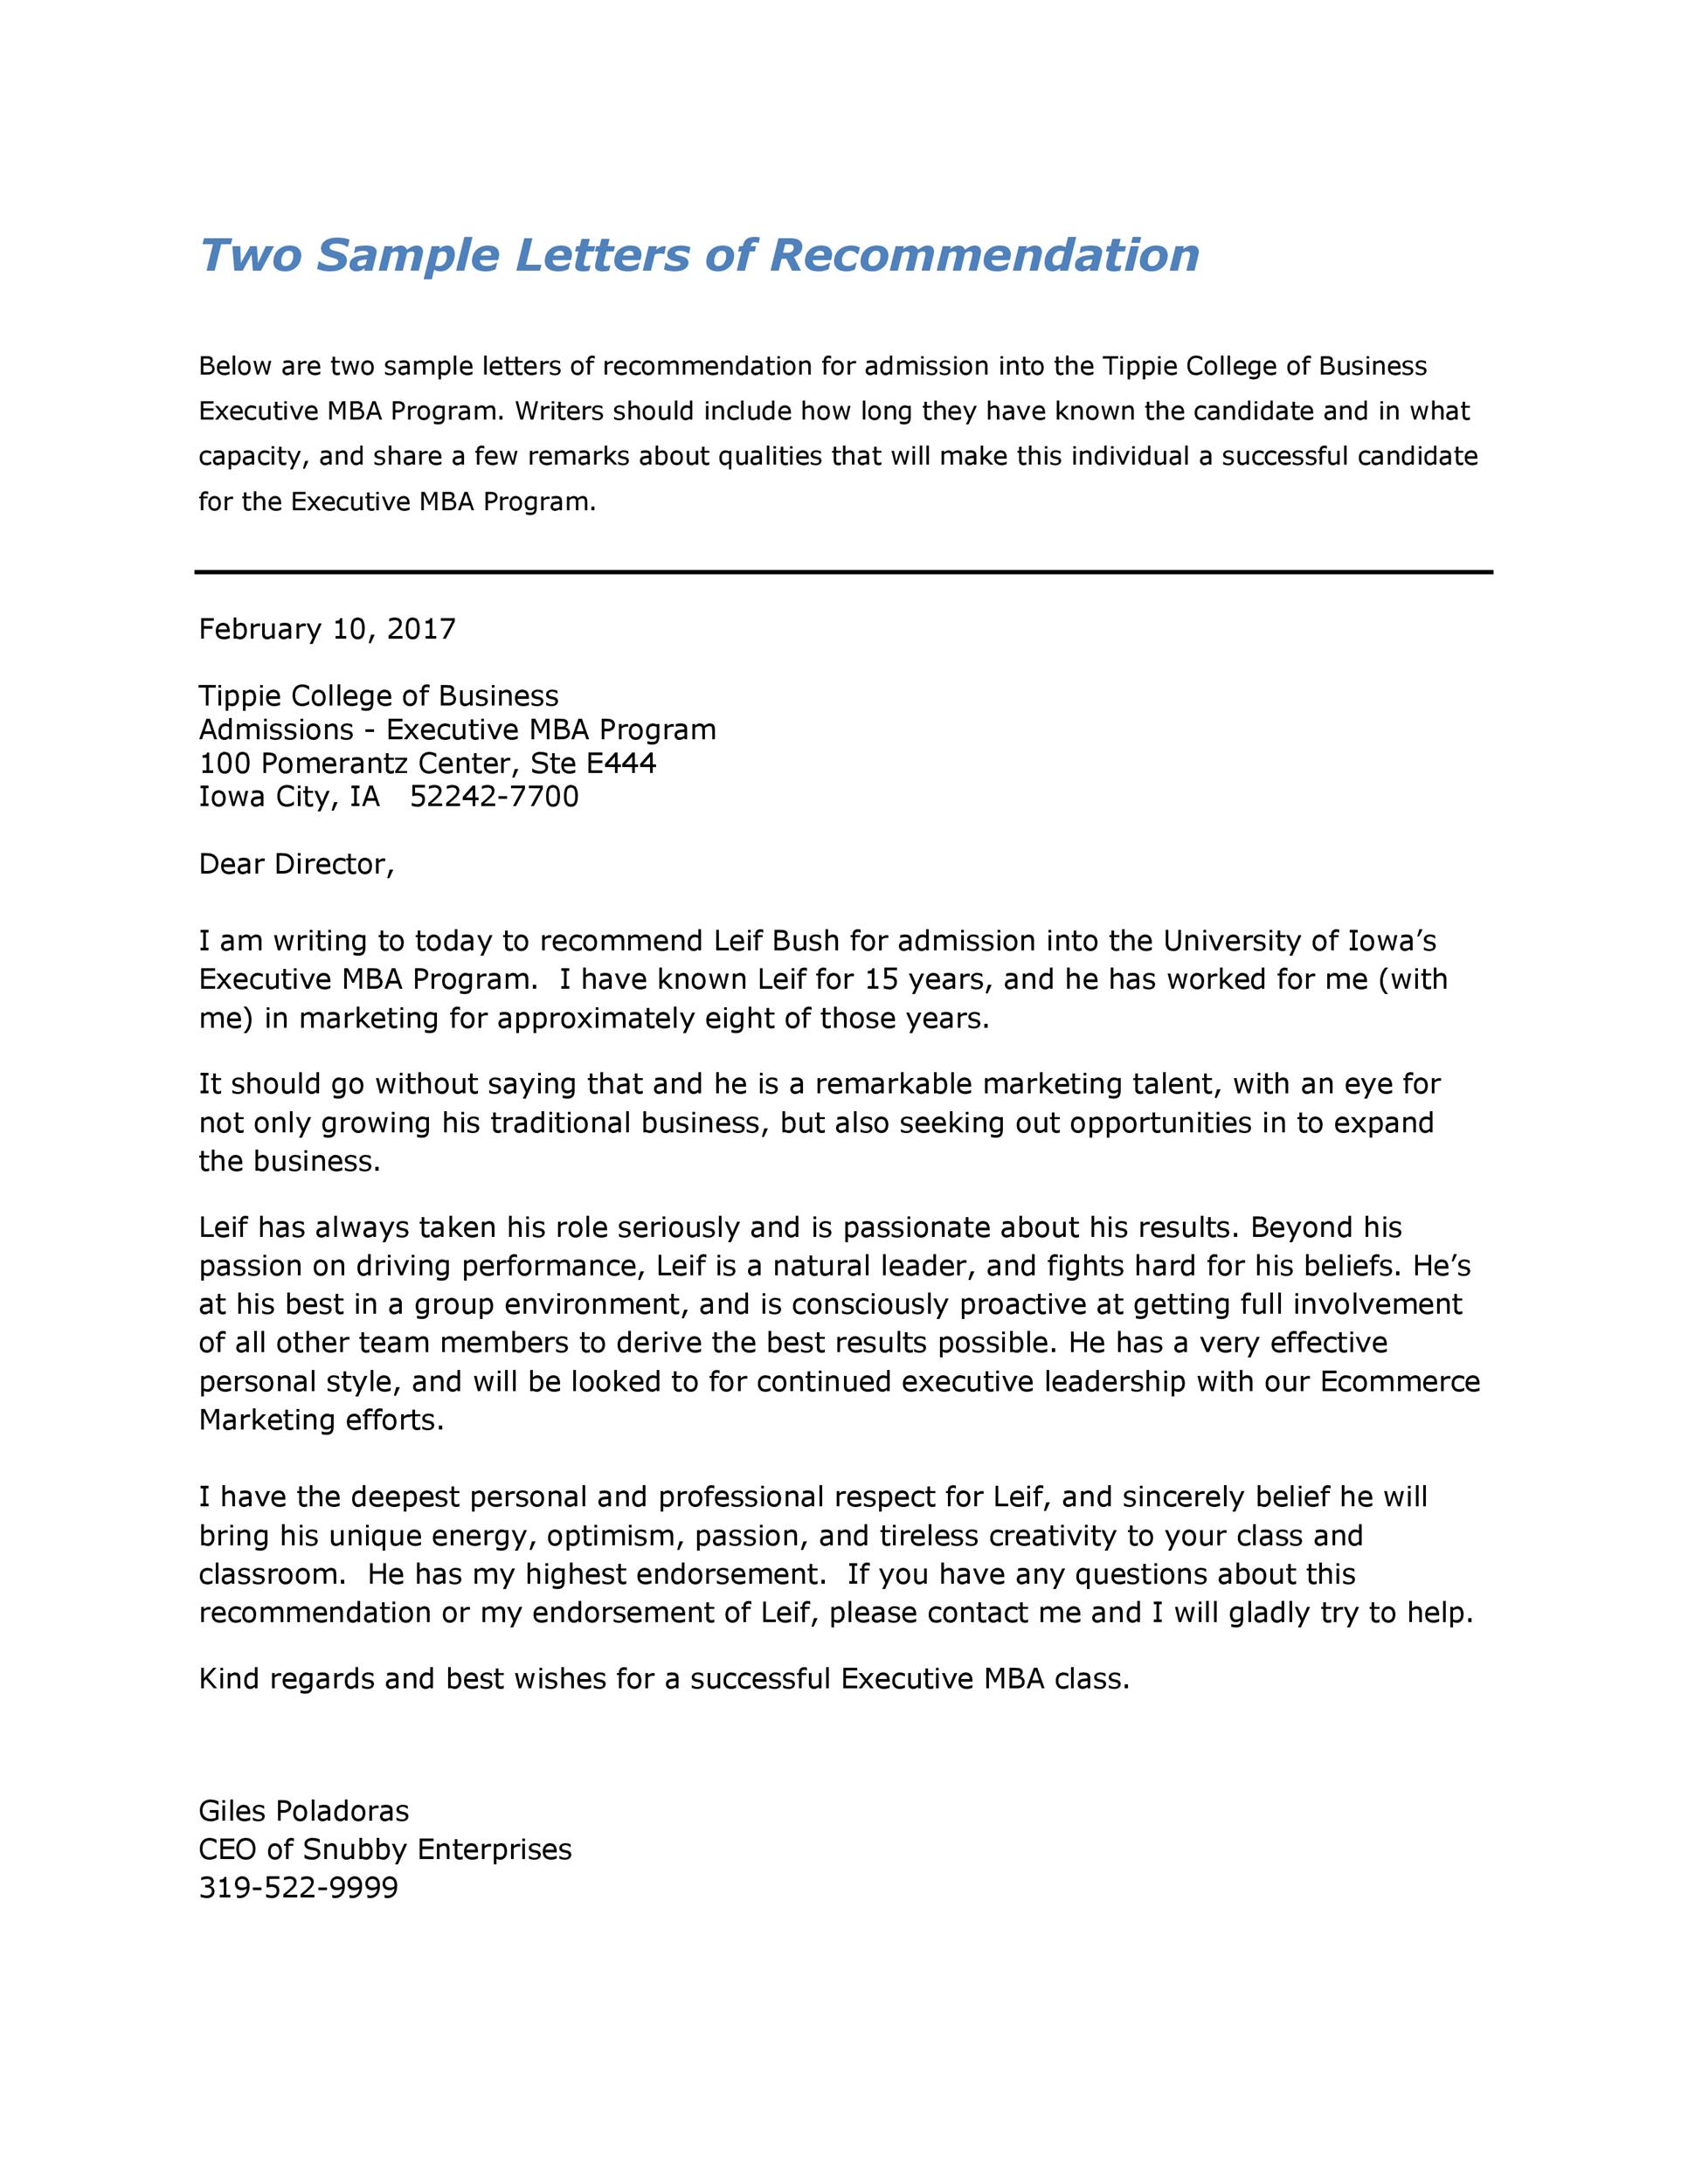 Sample Letter Of Recommendation Personal